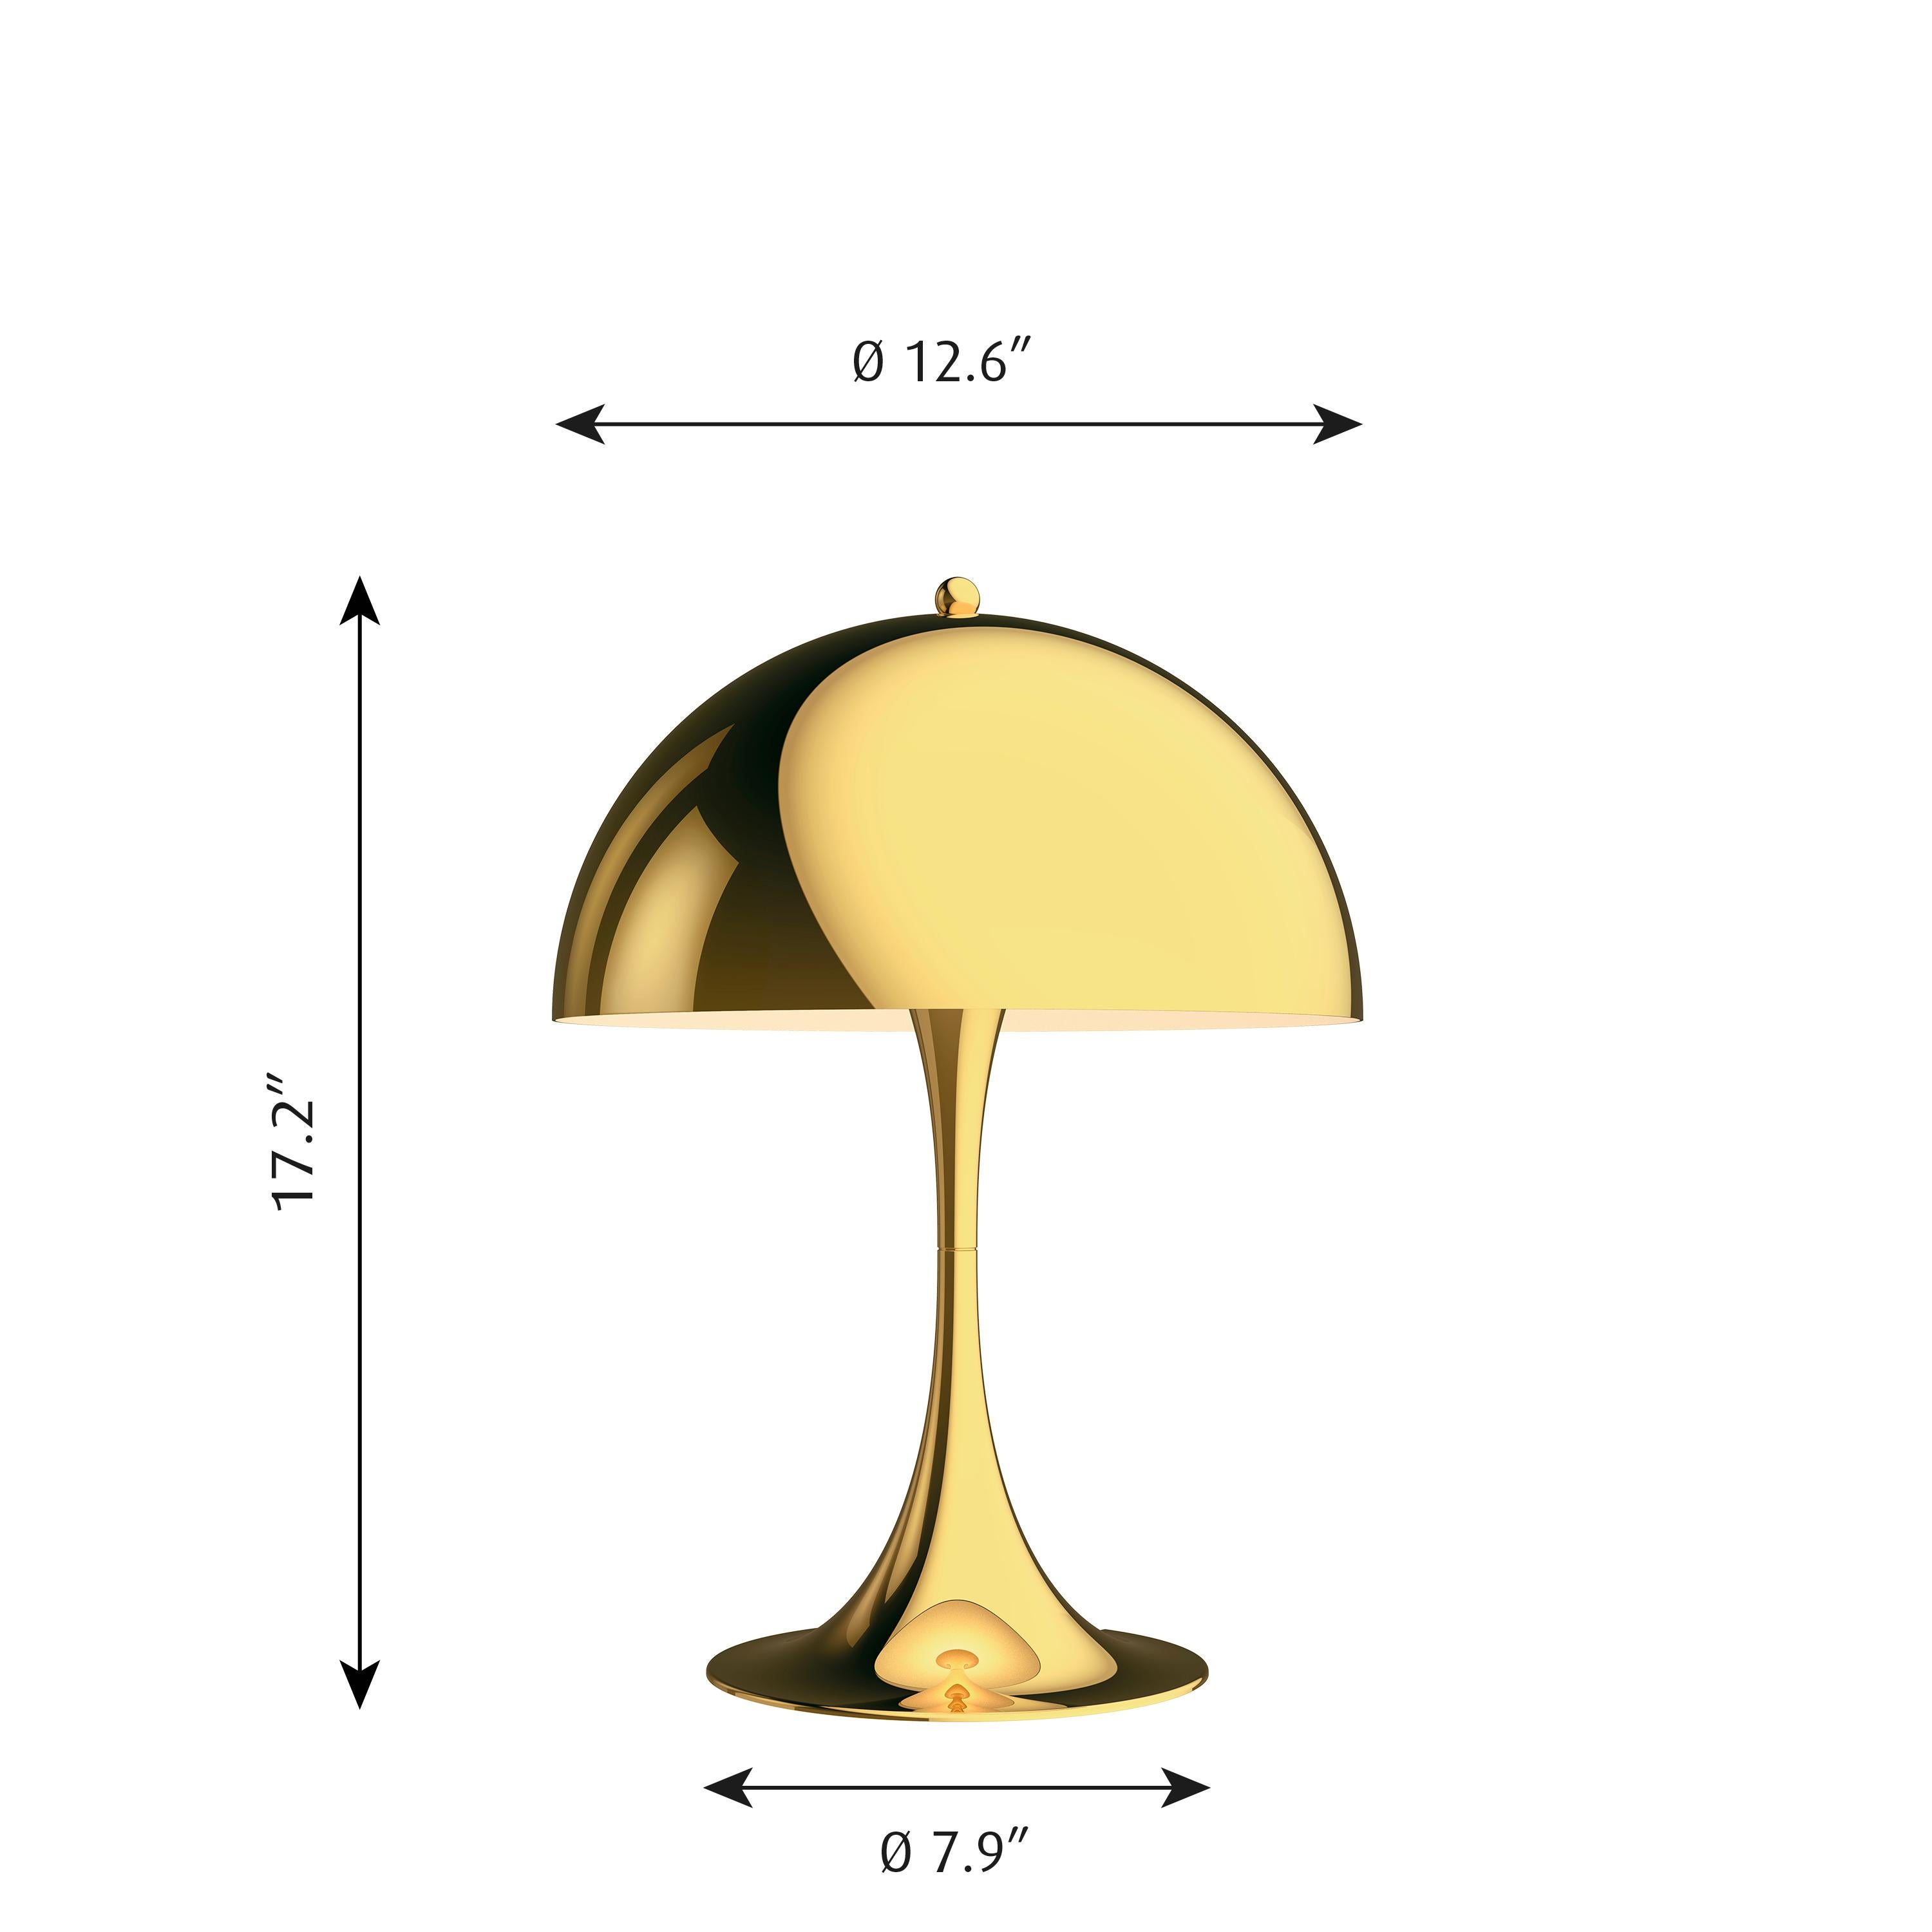 Verner Panton 'Panthella 320' table lamp in brass for Louis Poulsen. The medium sized Panthella 320 table lamp uses Verner Panton's original drawings to produce an organically shaped lamp with a metal shade. The original Panthella was designed in